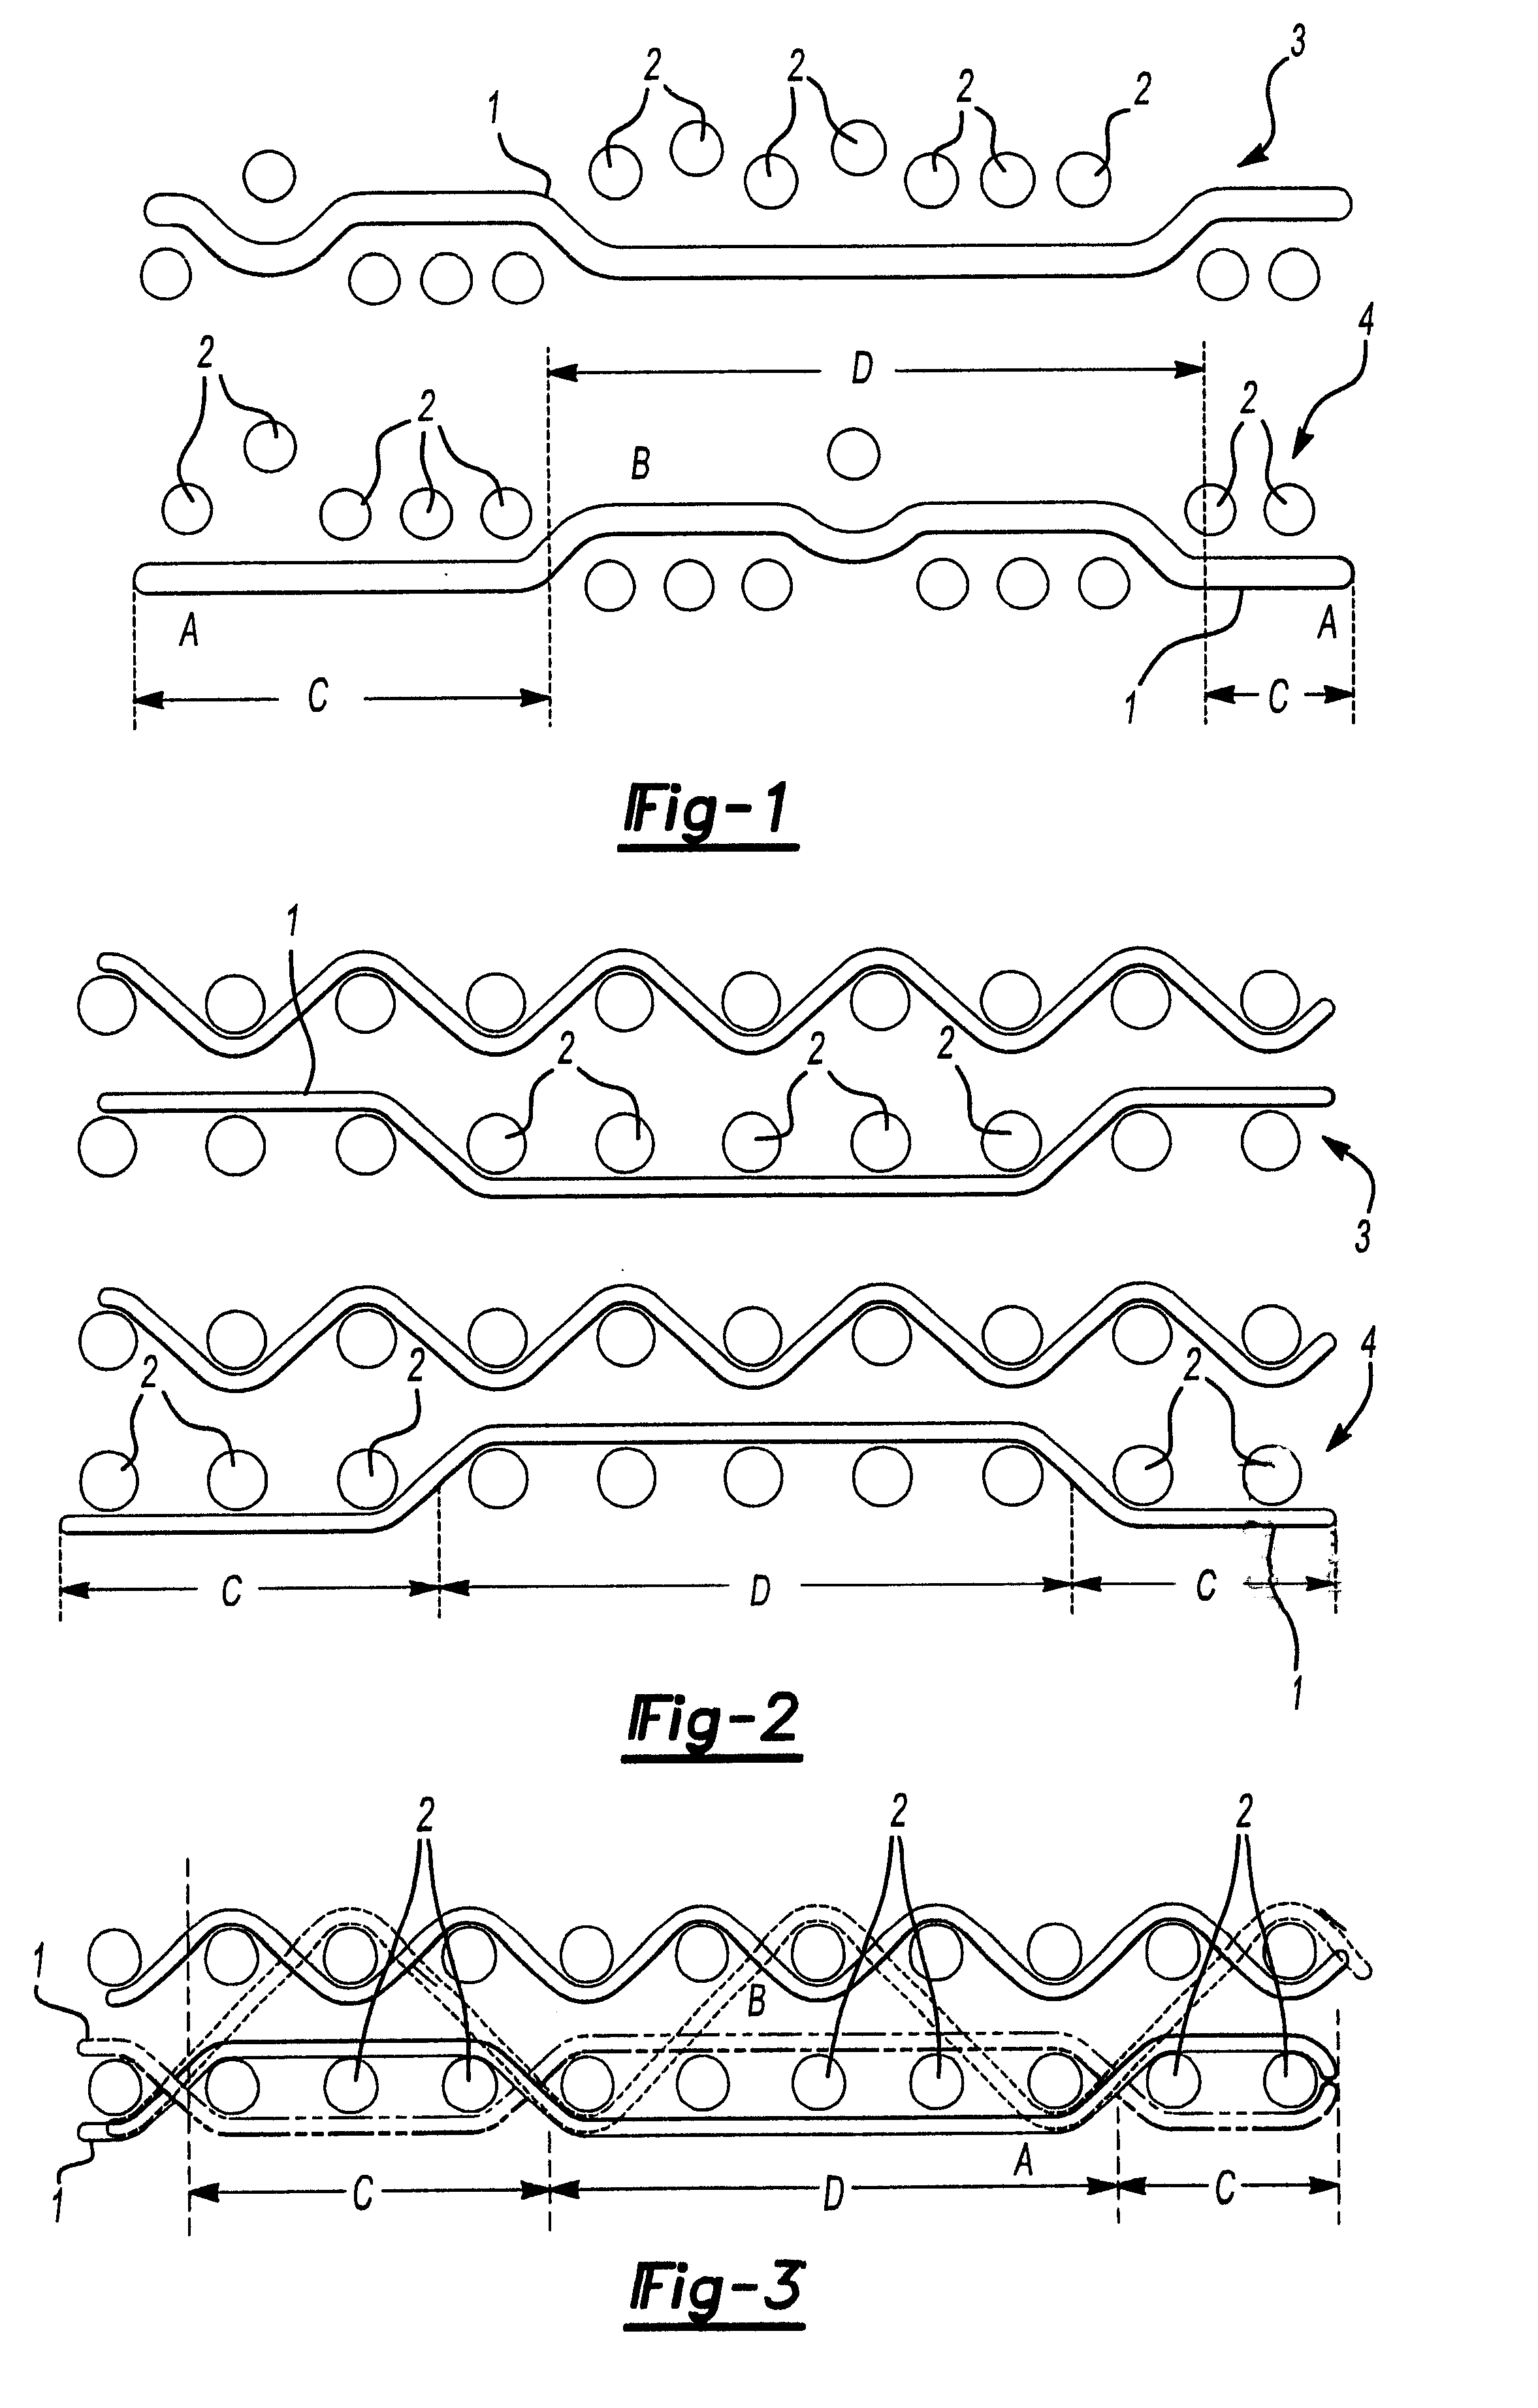 Multi-layer paper machine wire for dewatering and sheetforming purposes